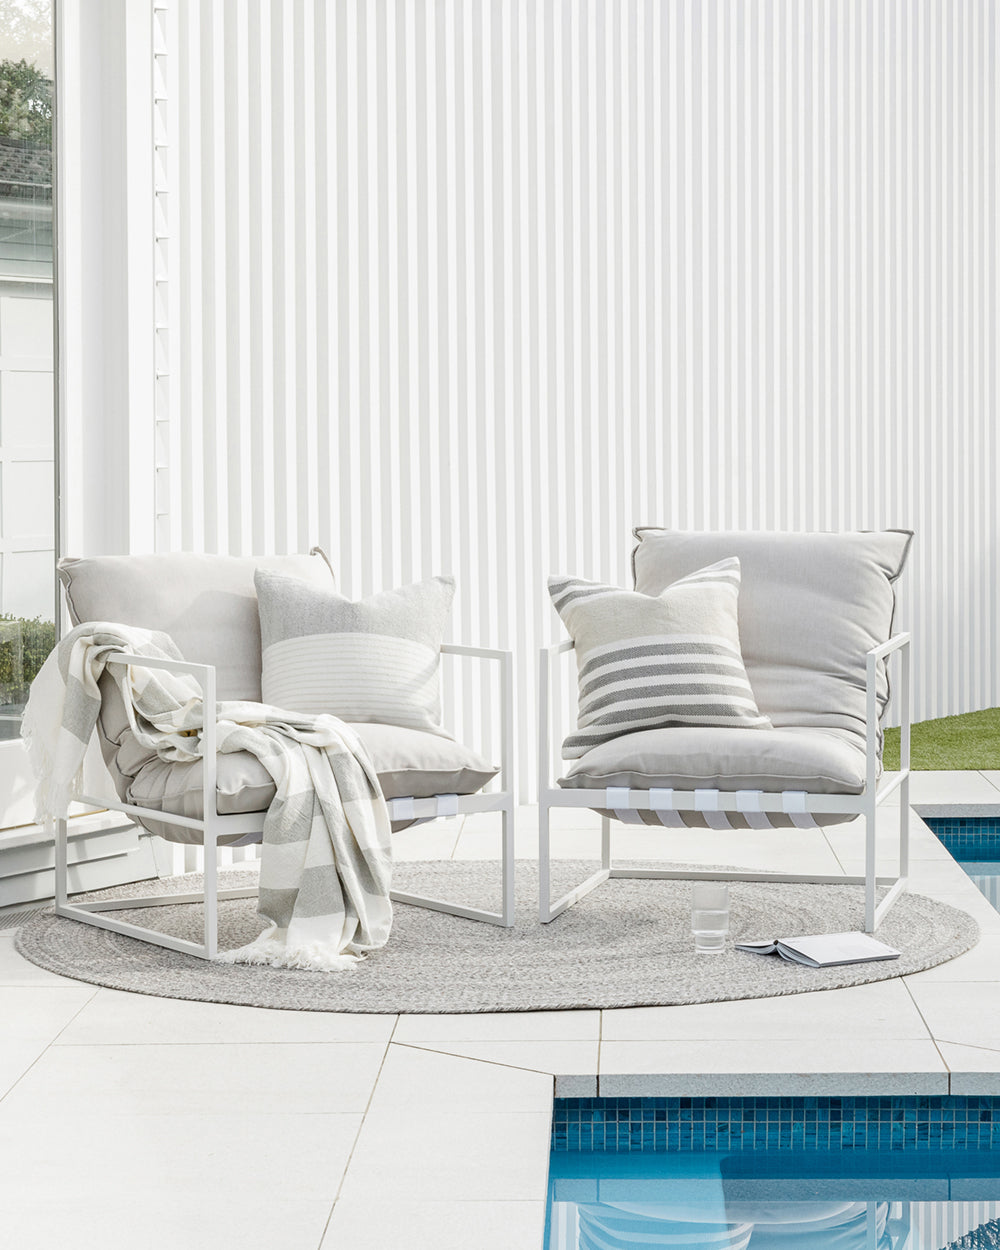 Corbett outdoor cushion on two patio chairs by the pool